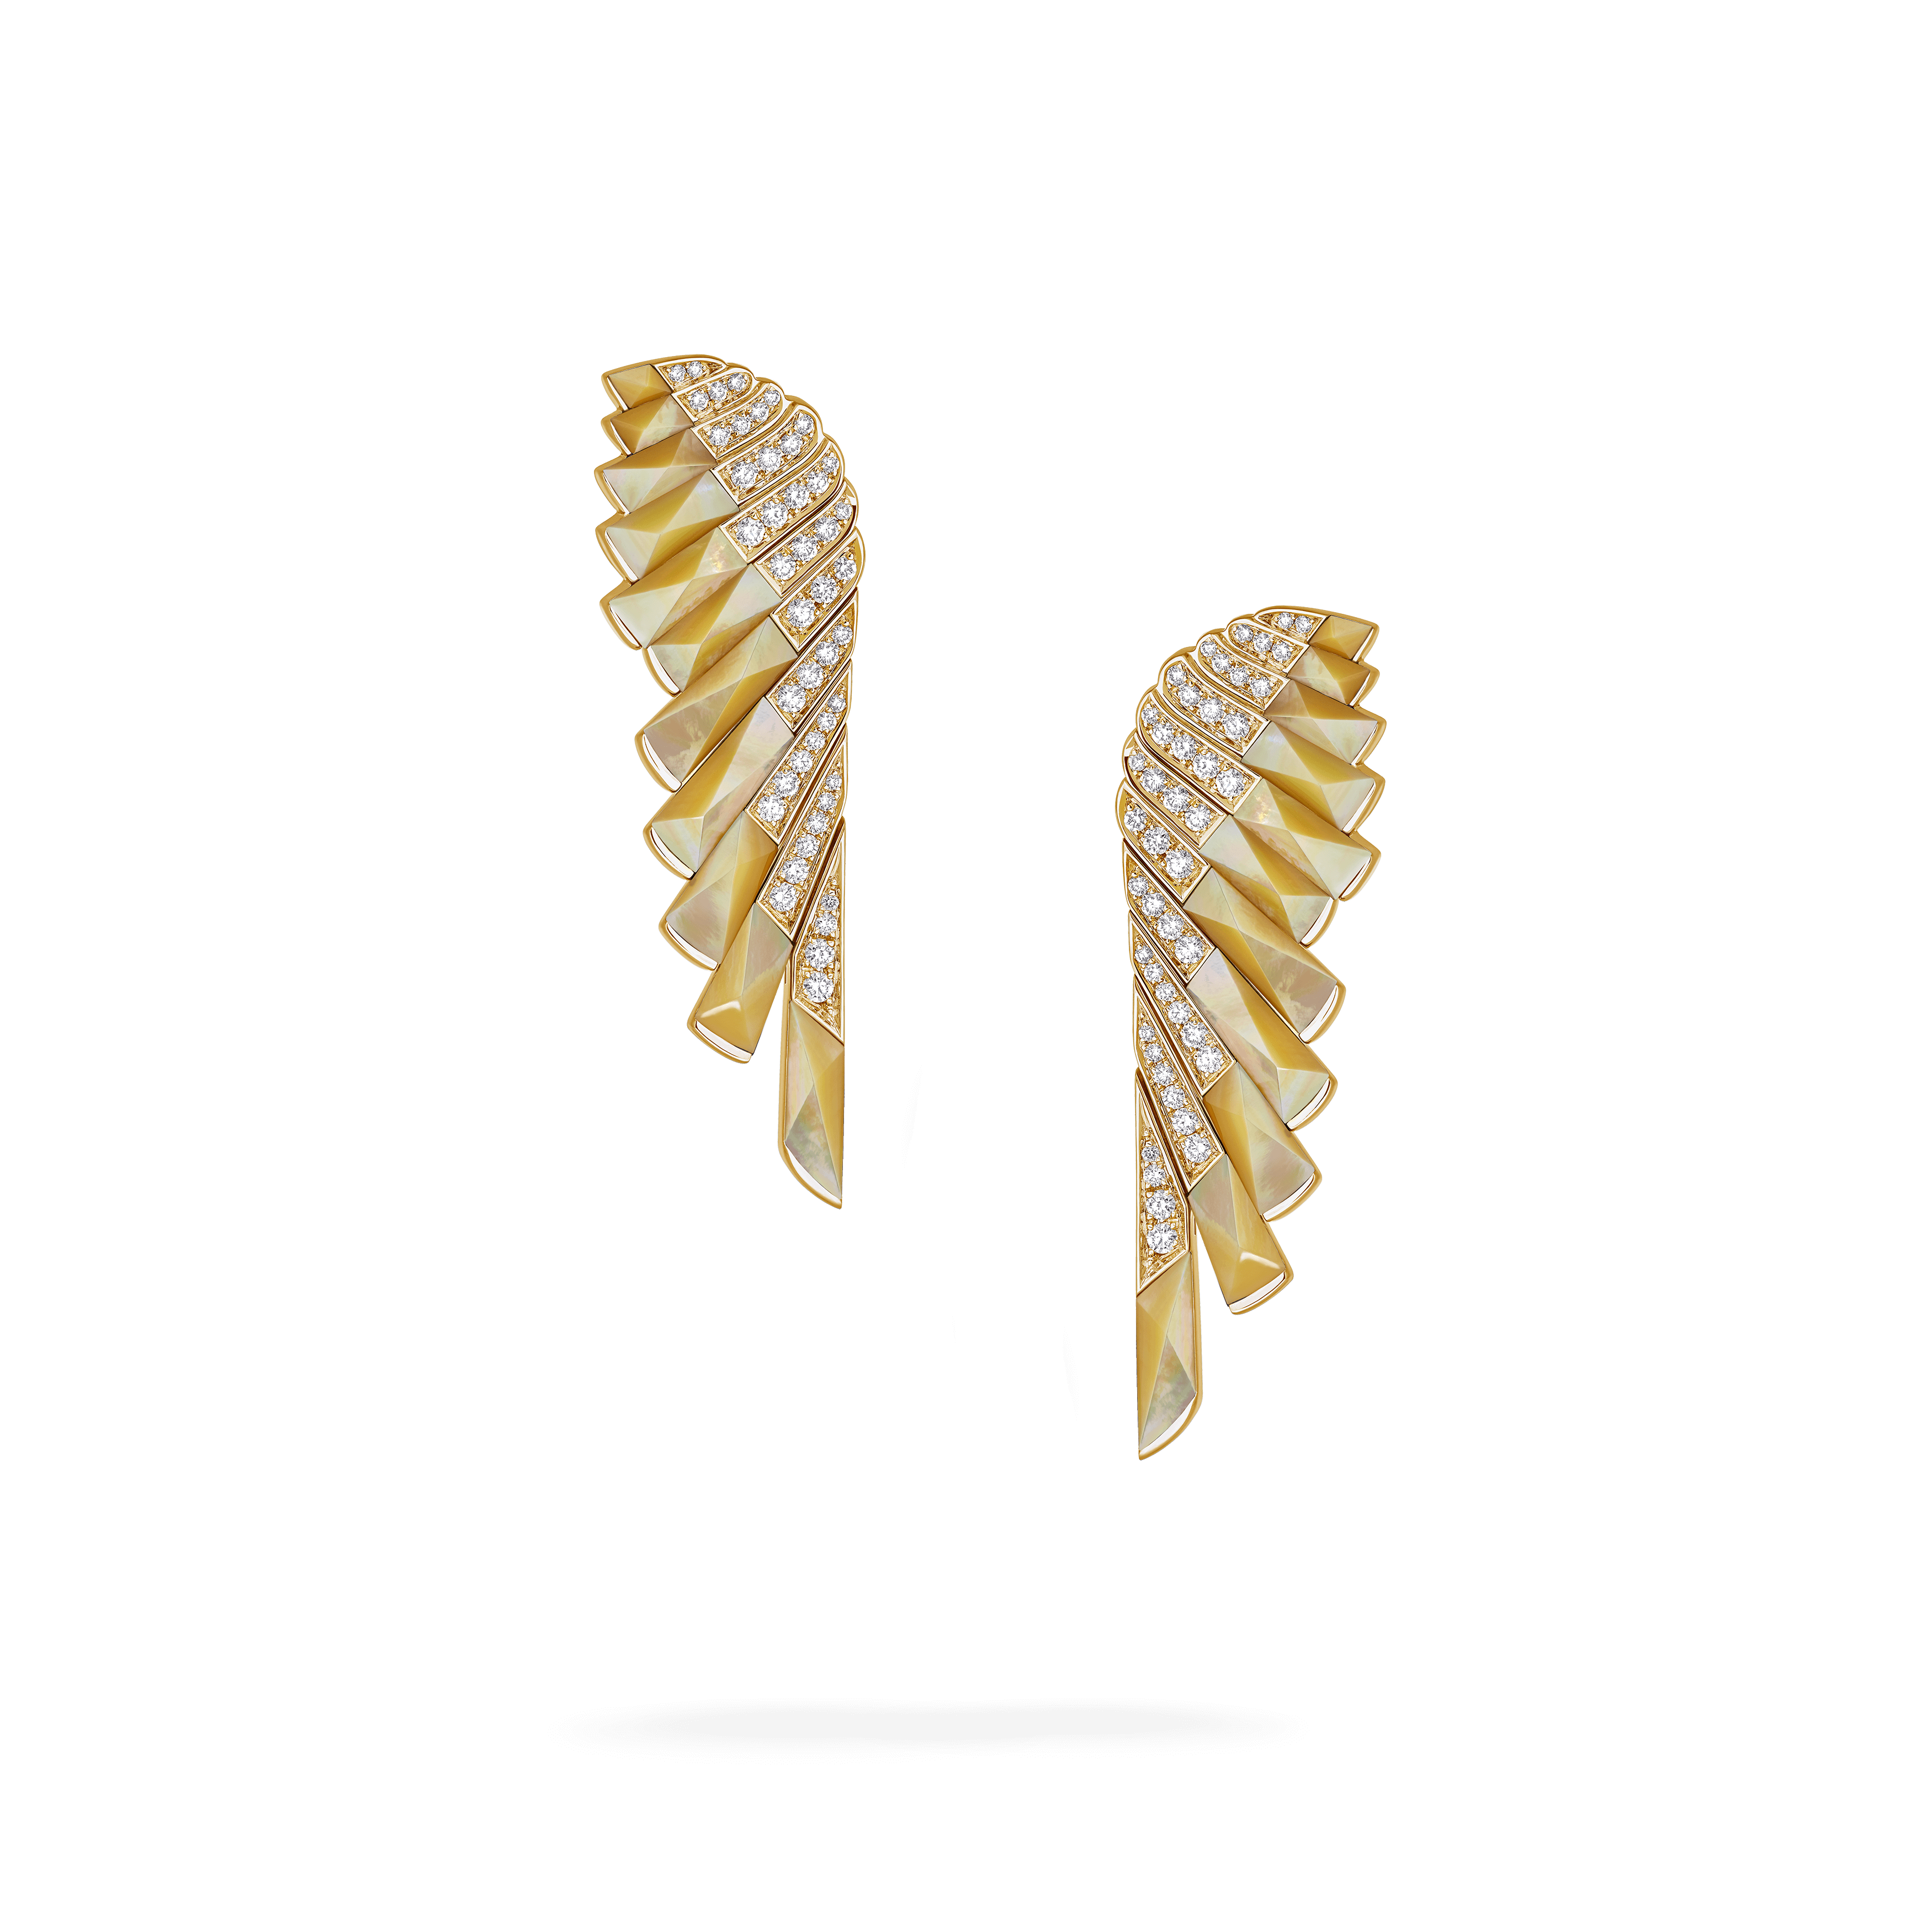 Wings Rising Golden Mother of Pearl and Diamond Earrings | Garrard